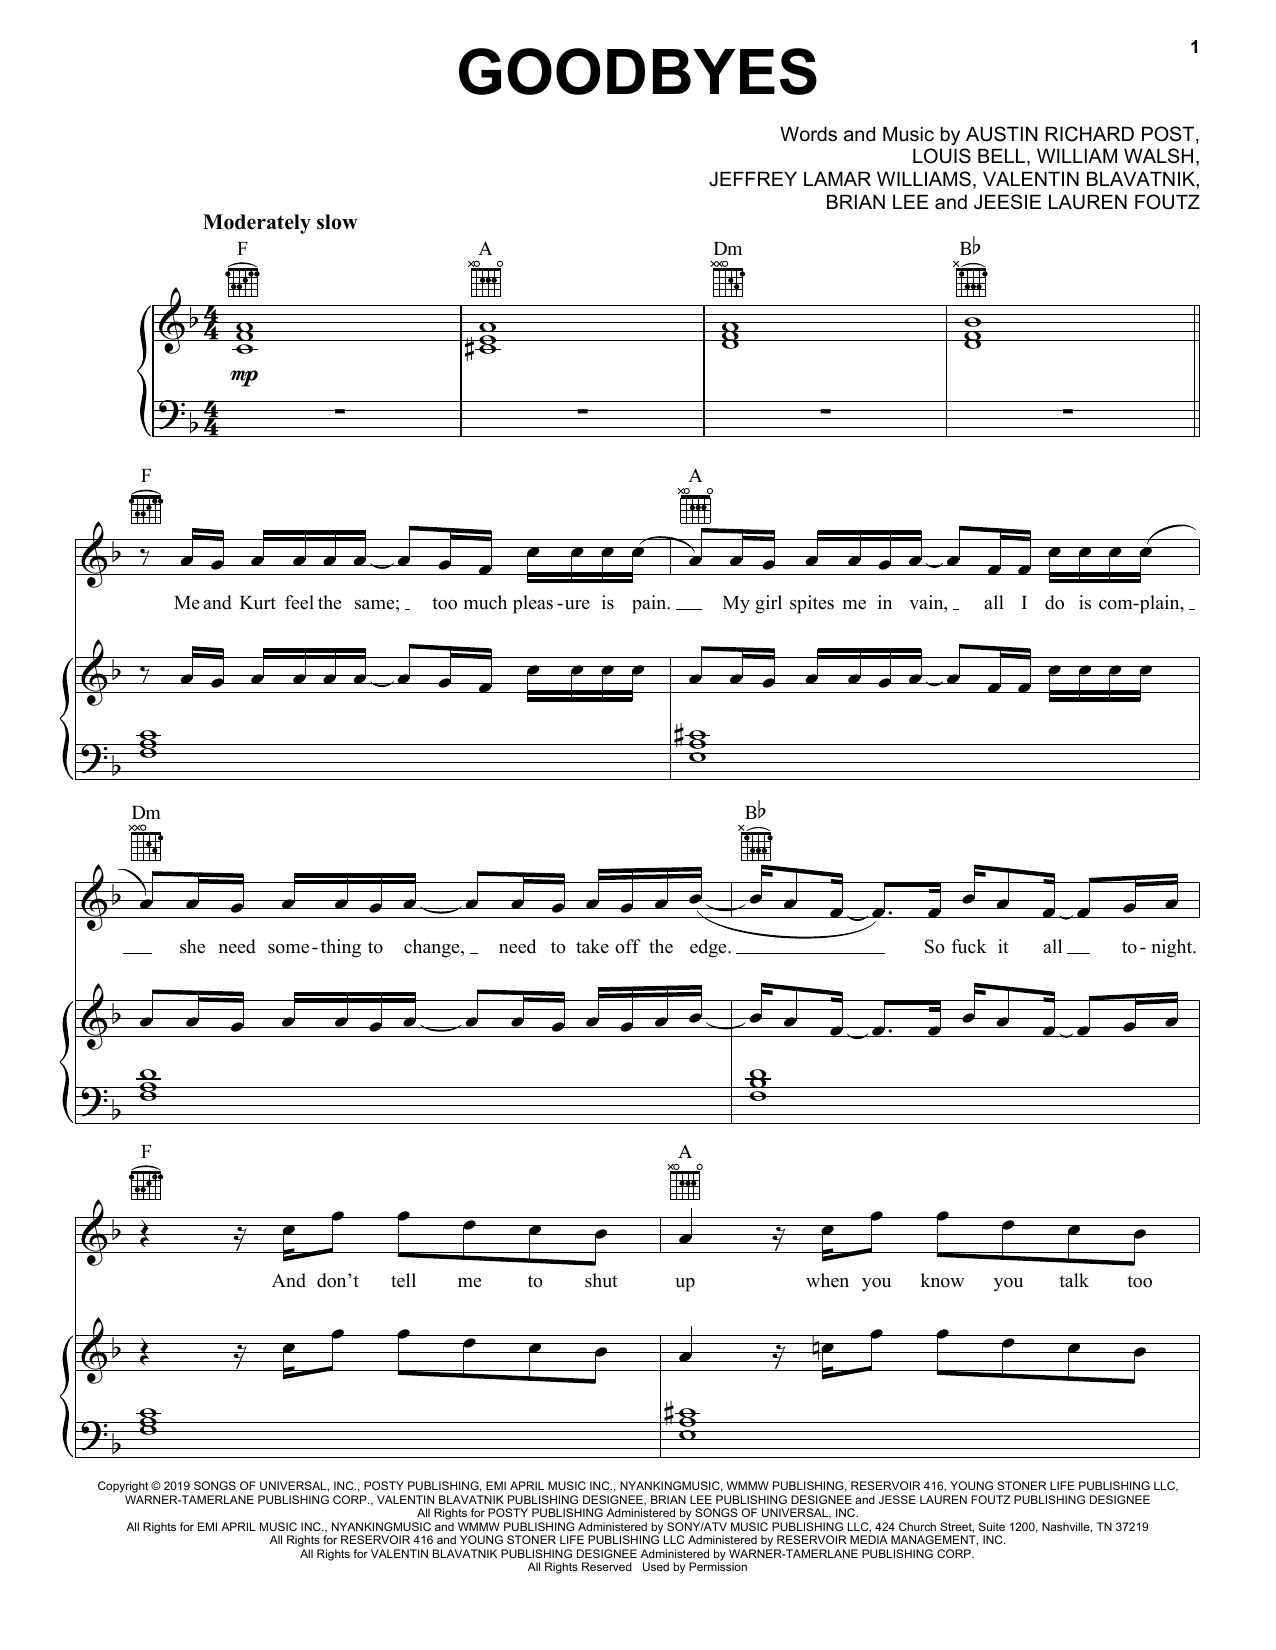 Download Post Malone Goodbyes (feat. Young Thug) Sheet Music